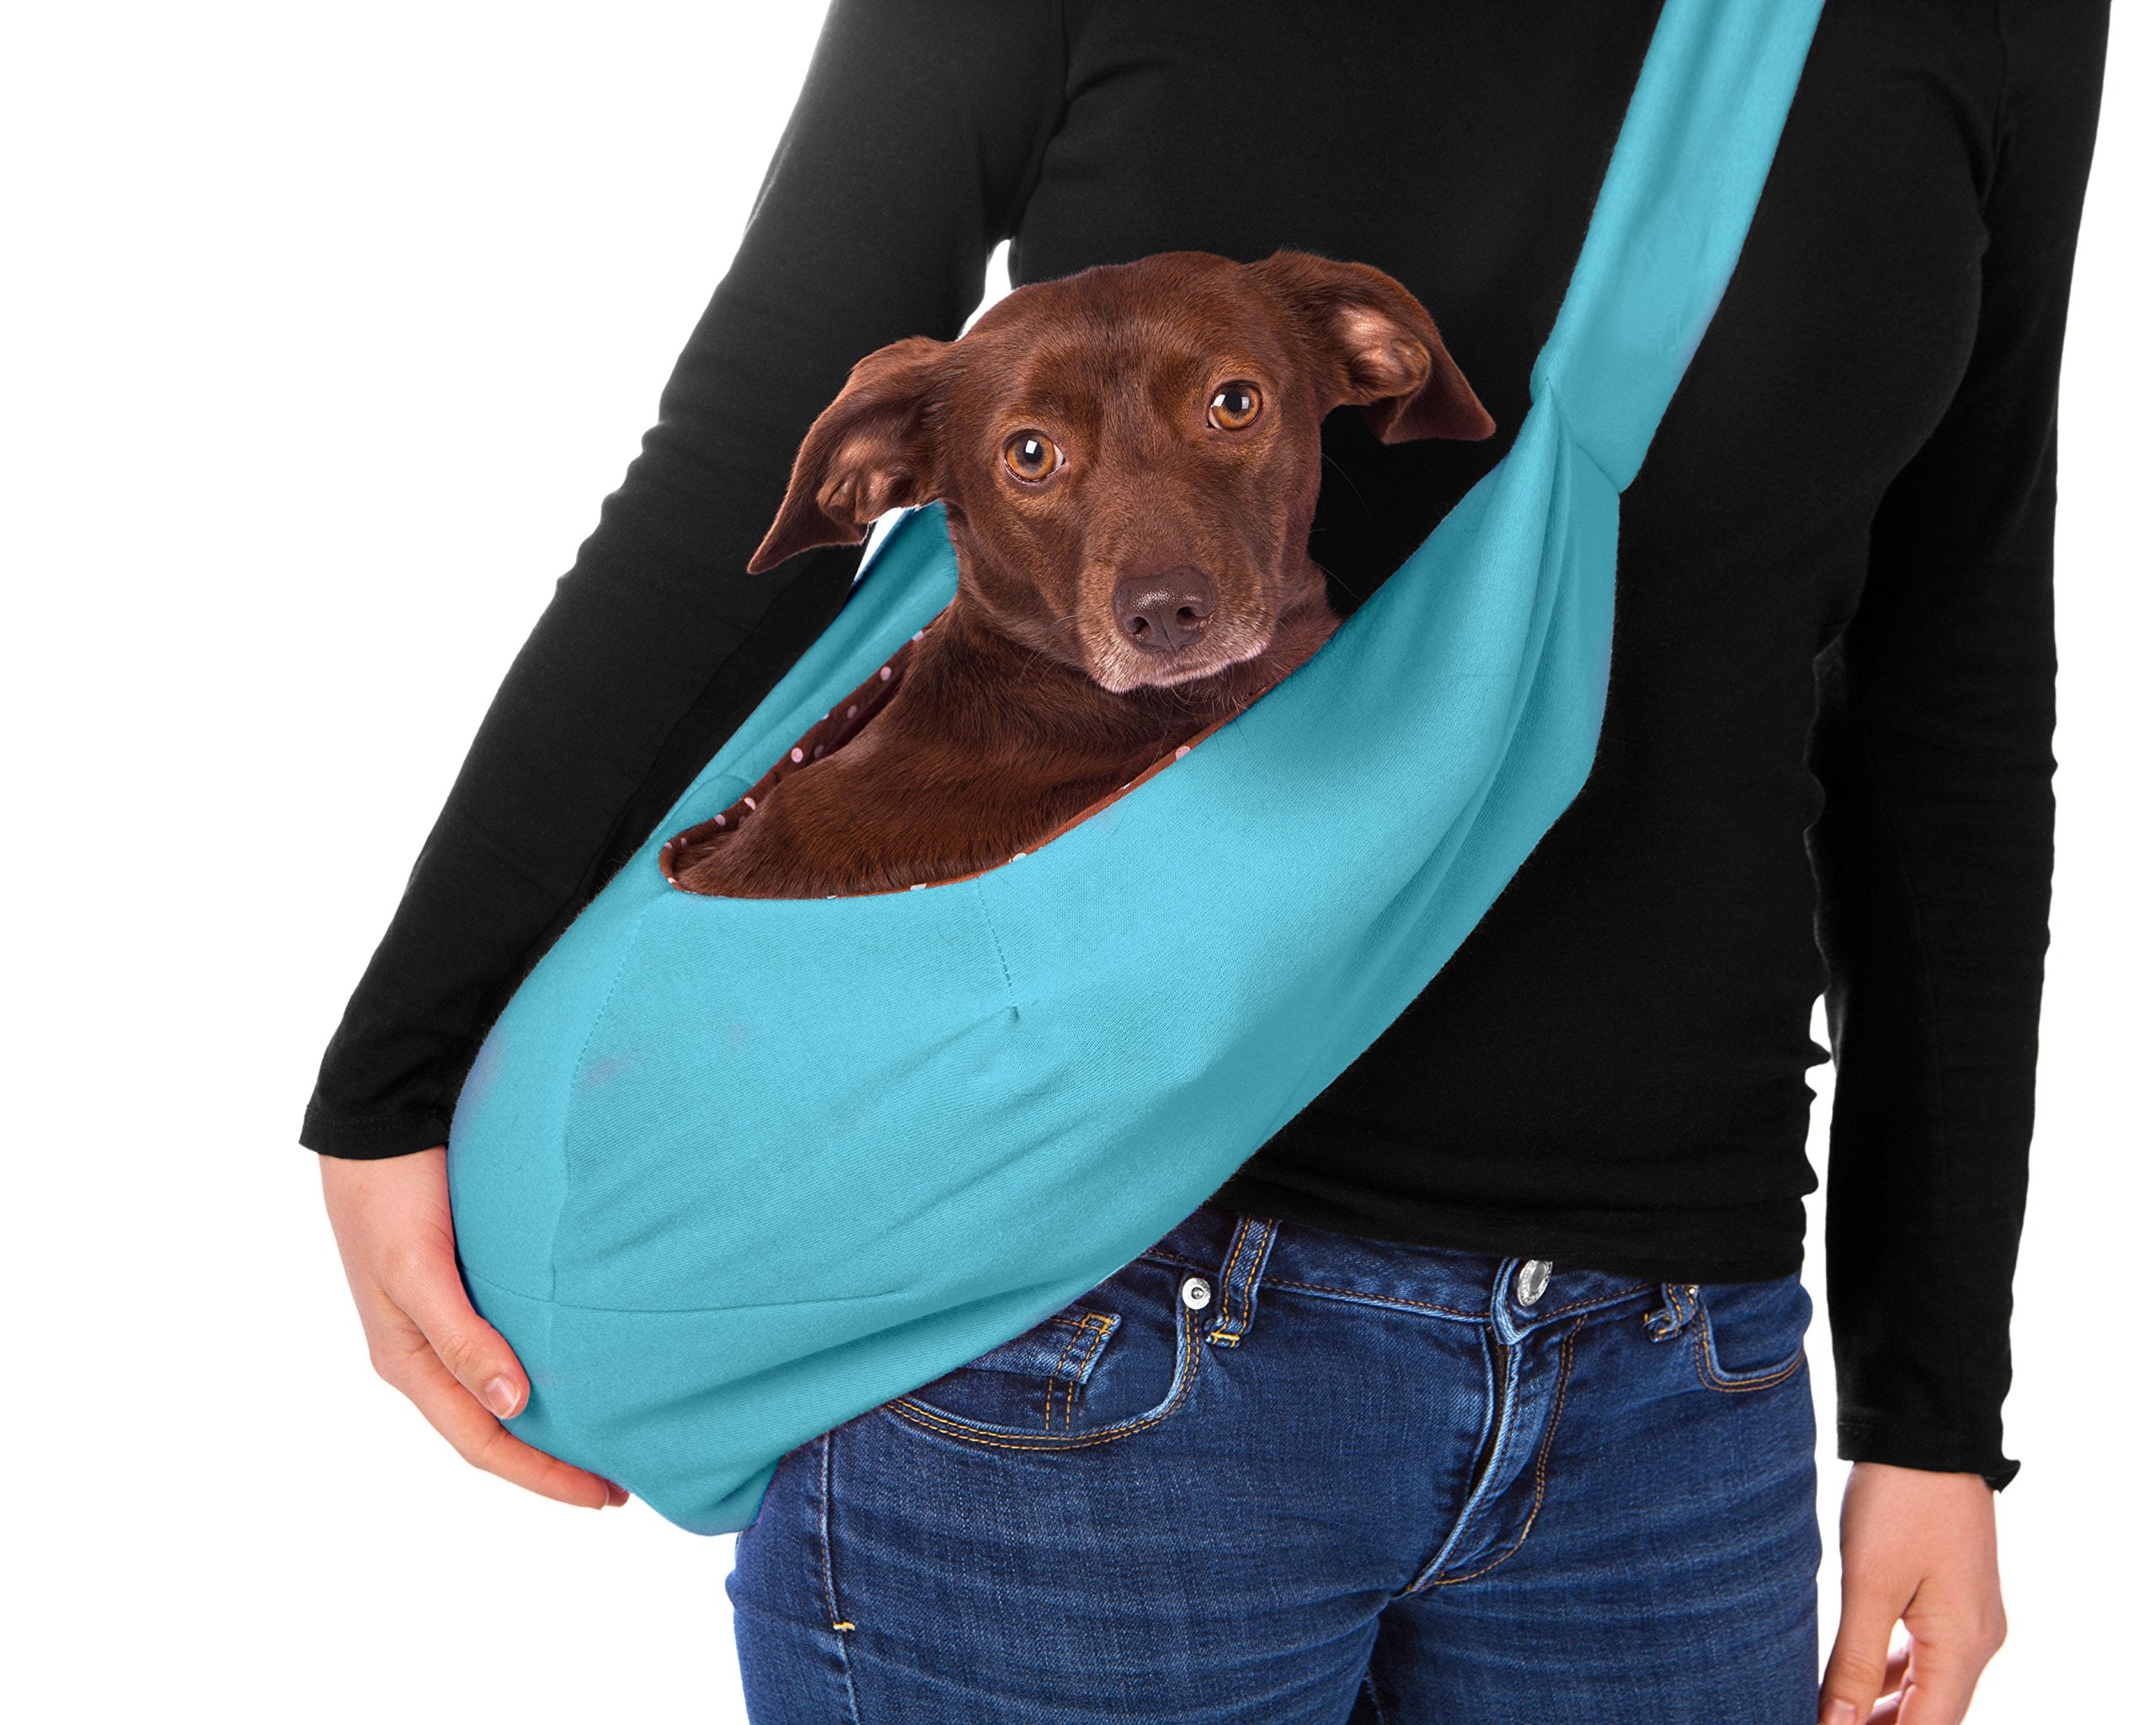 iPrimio Dog and Cat Sling Carrier – Hands Free Reversible Pet Papoose Bag - Soft Pouch and Tote Design – Suitable for Puppy, Small Dogs, and Cats for Outdoor Travel  - Acceptable